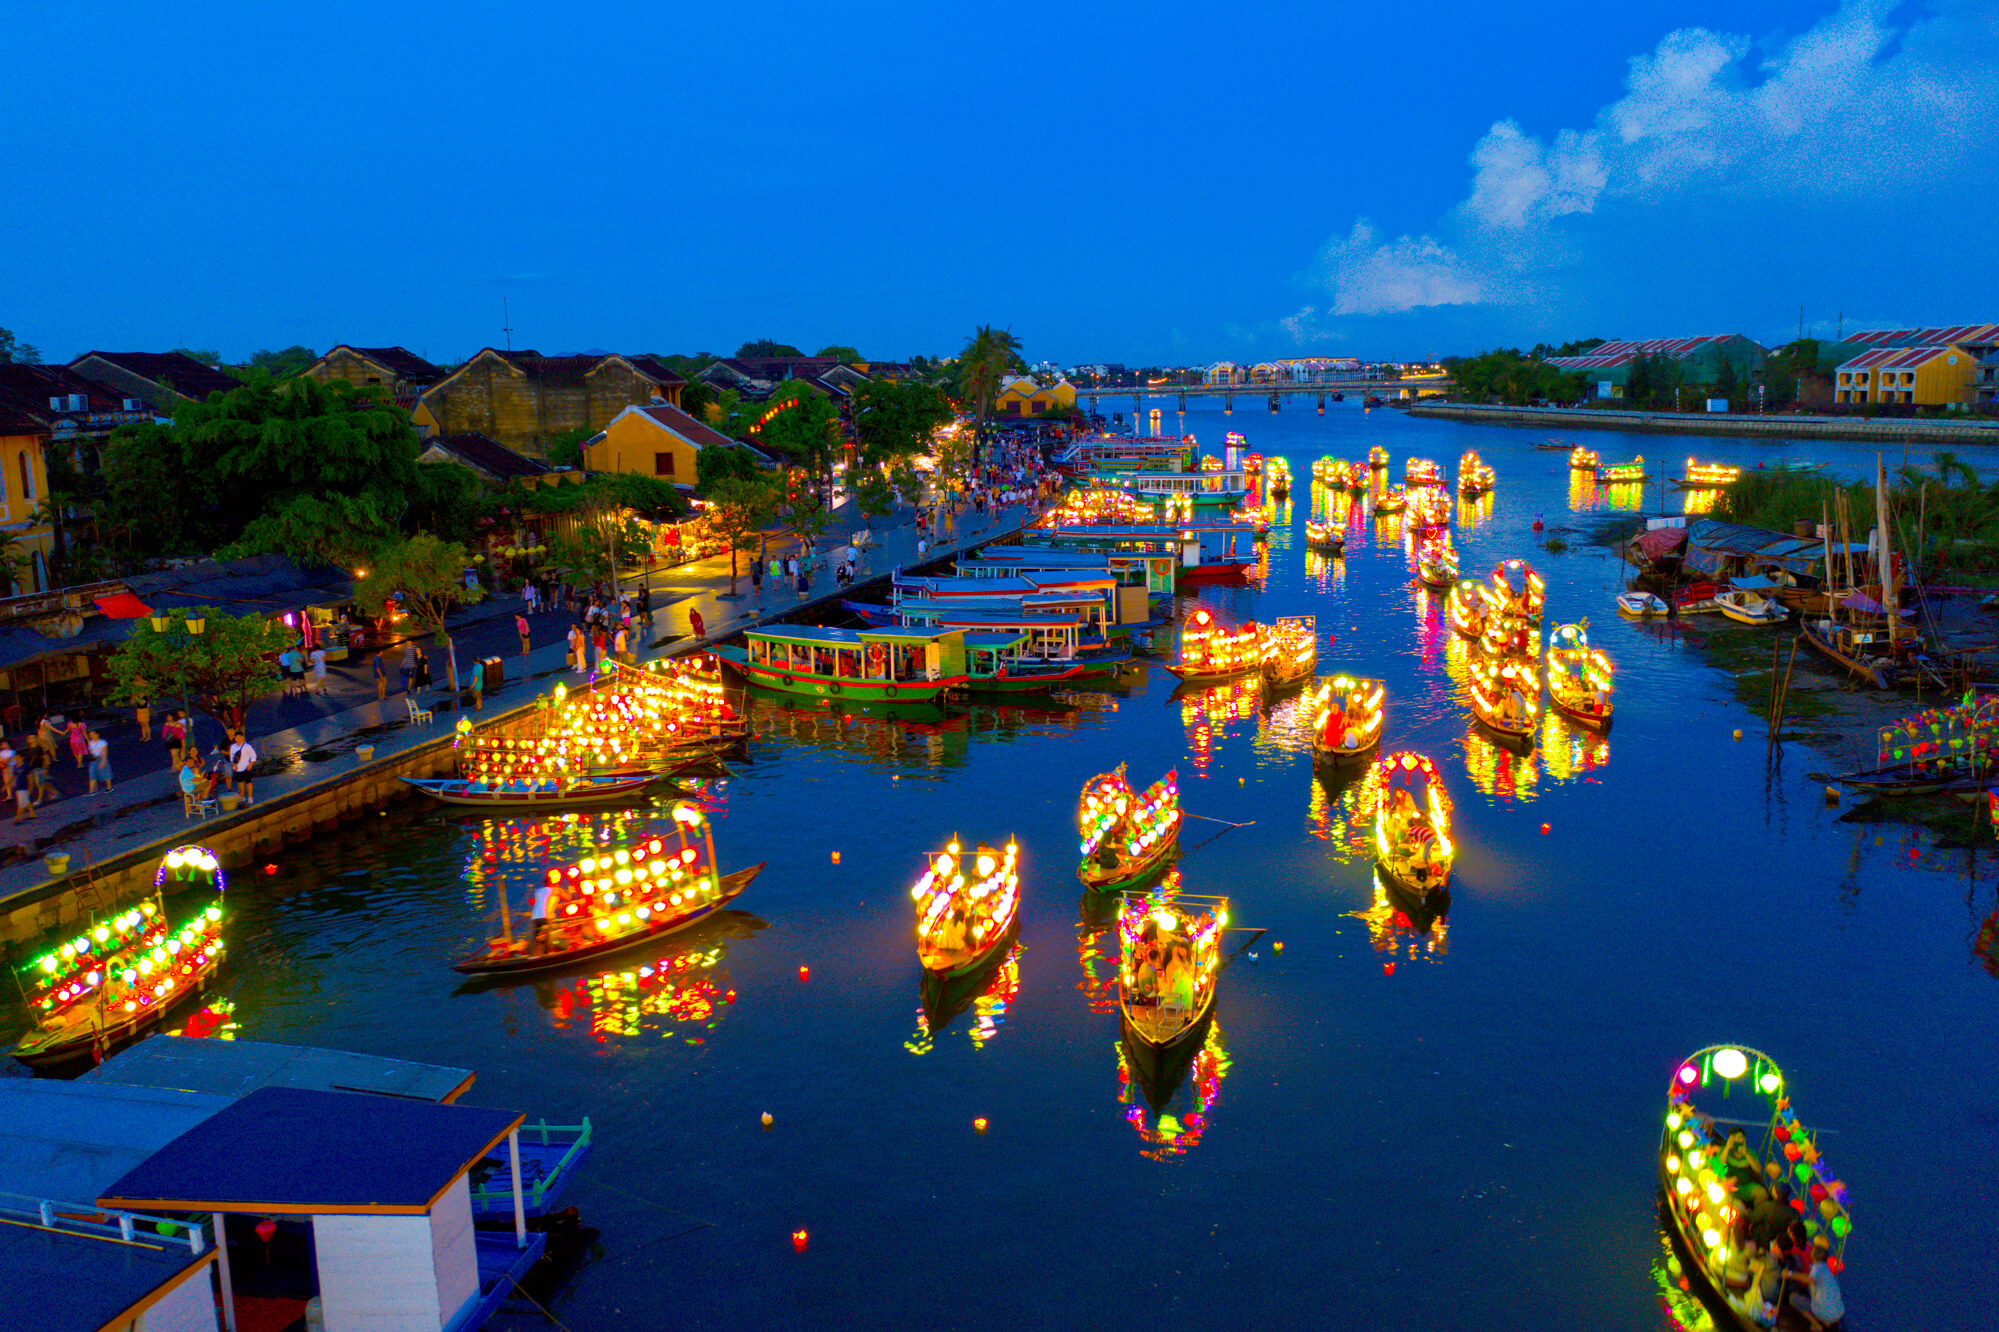 Night boating in Hoi An